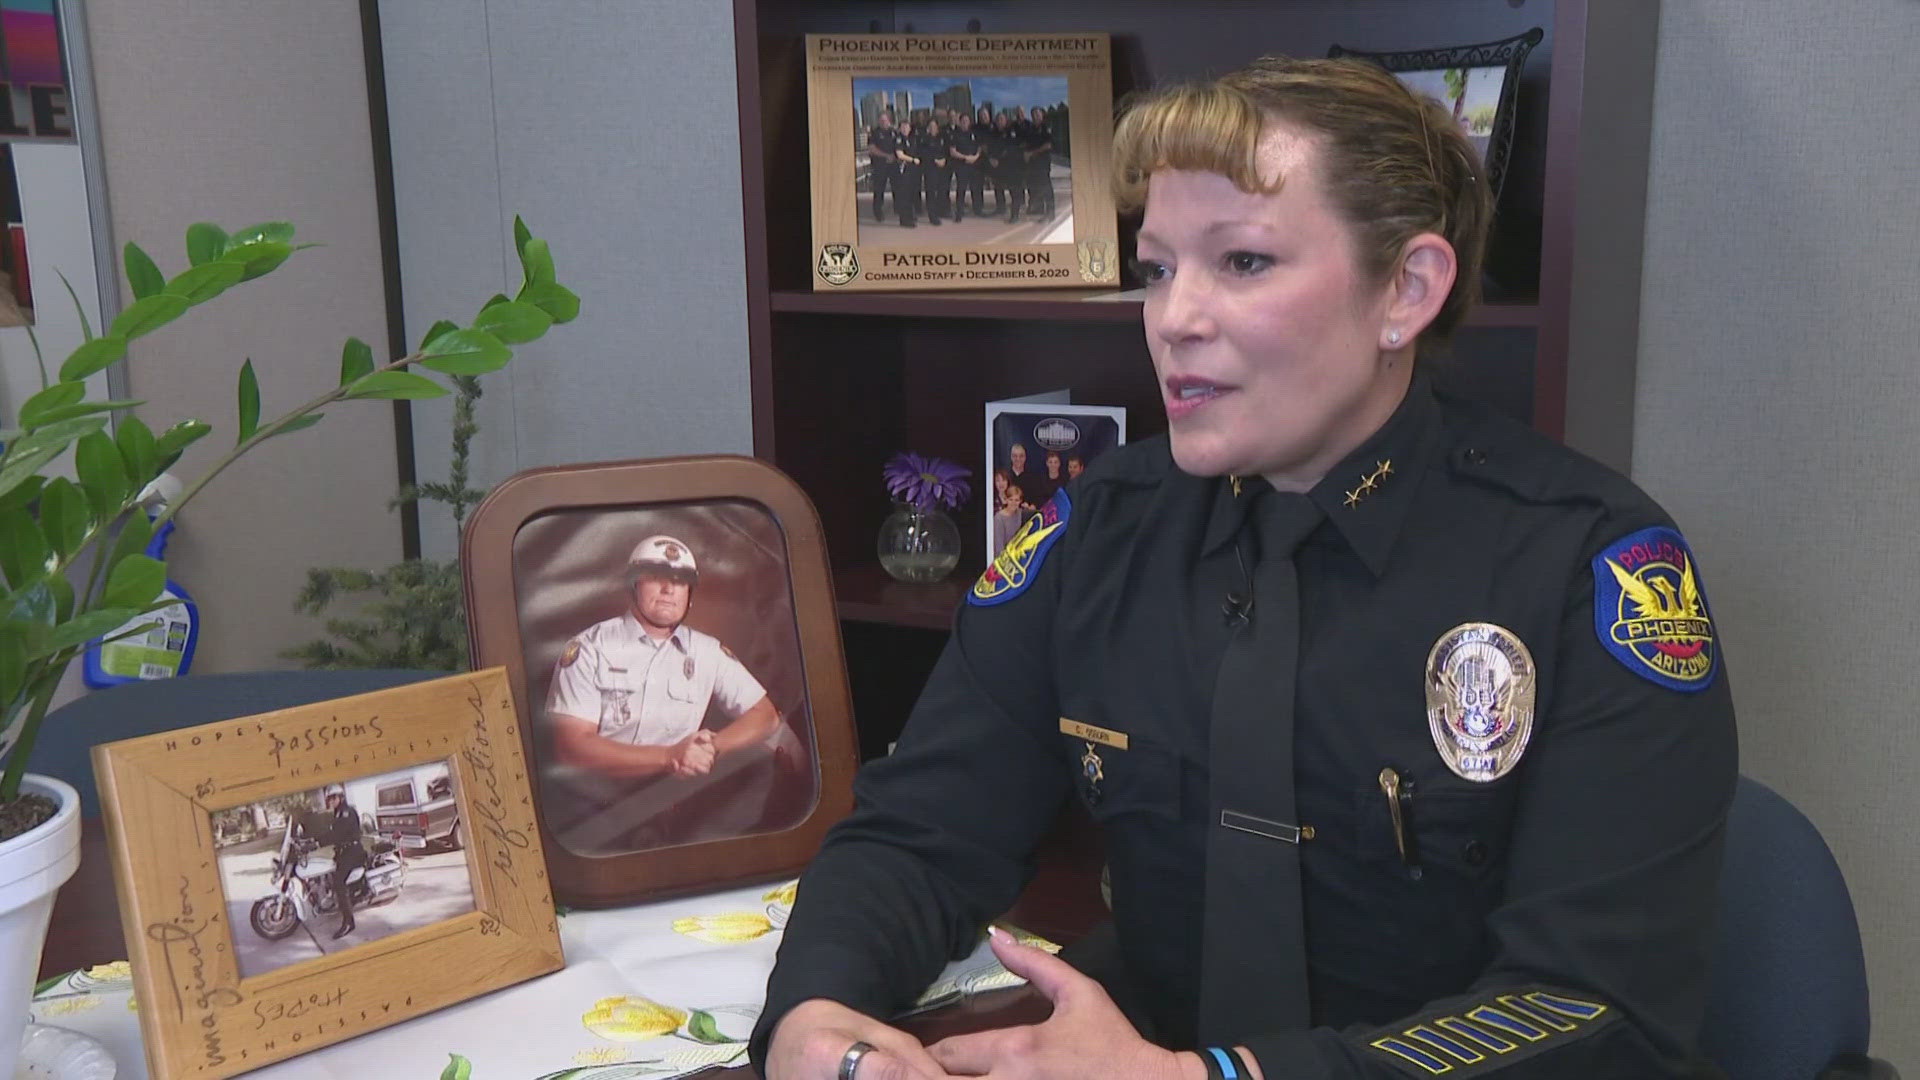 Assistant Chief Charmane Osborn is the highest ranking woman in the Phoenix Police Department and the reason she puts on the uniform is deeply personal.